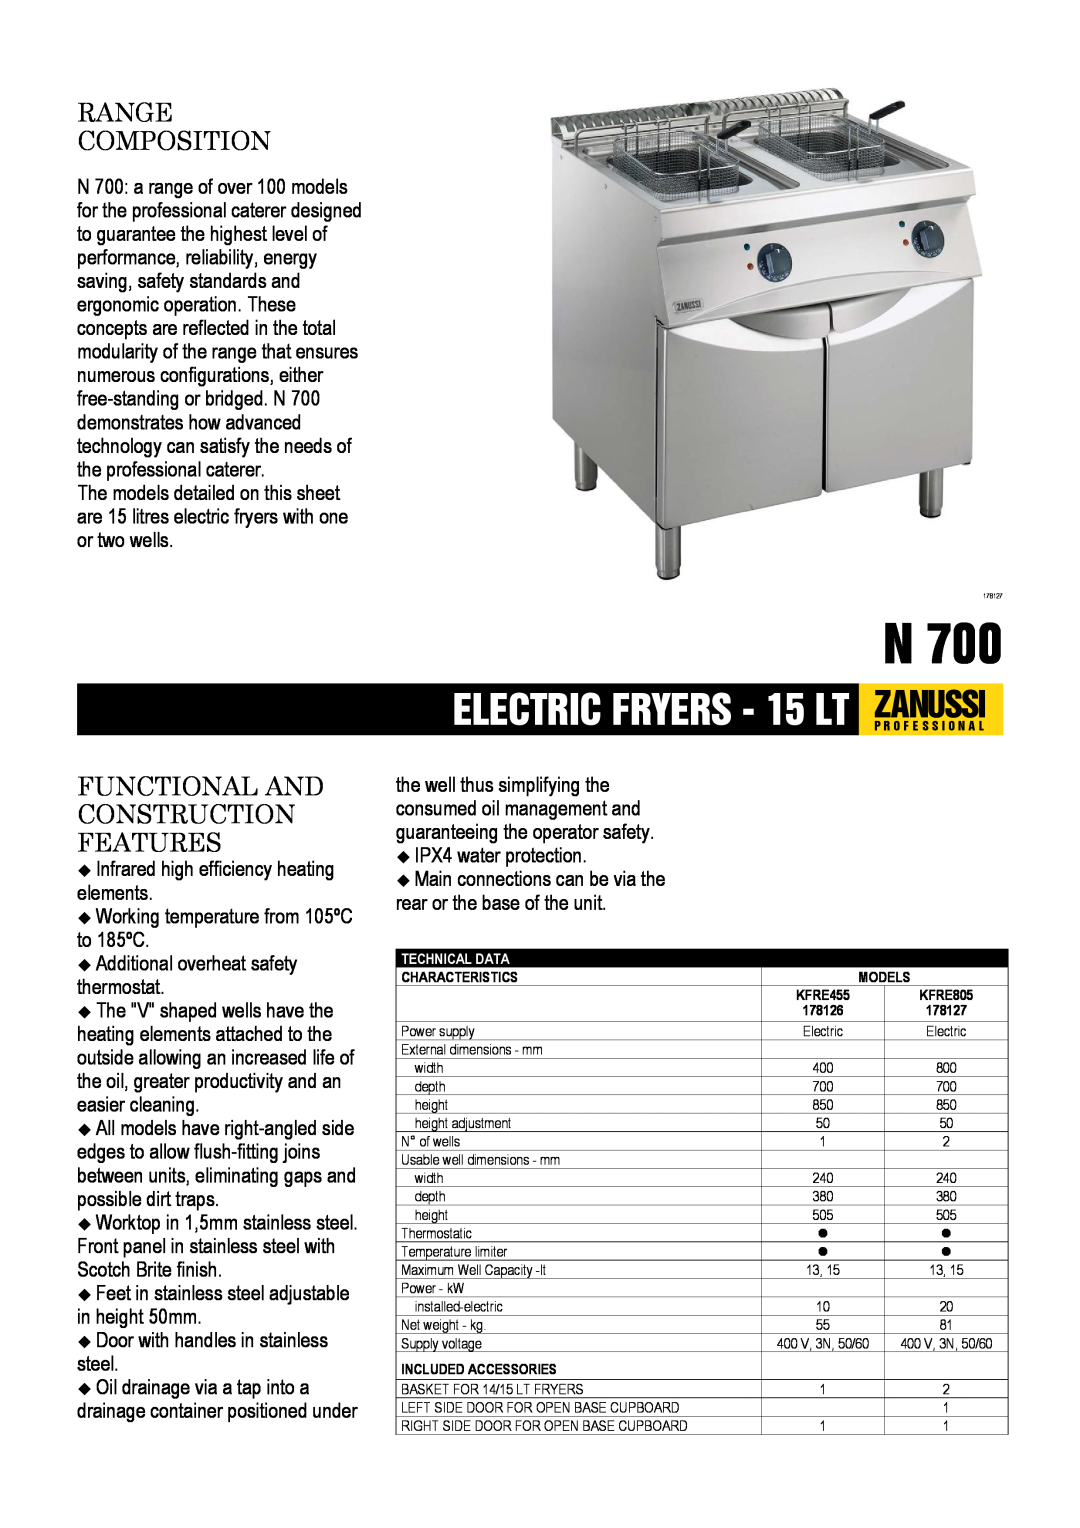 Electrolux KFRE805, KFRE455 dimensions Infrared high efficiency heating elements, Working temperature from 105ºC to 185ºC 